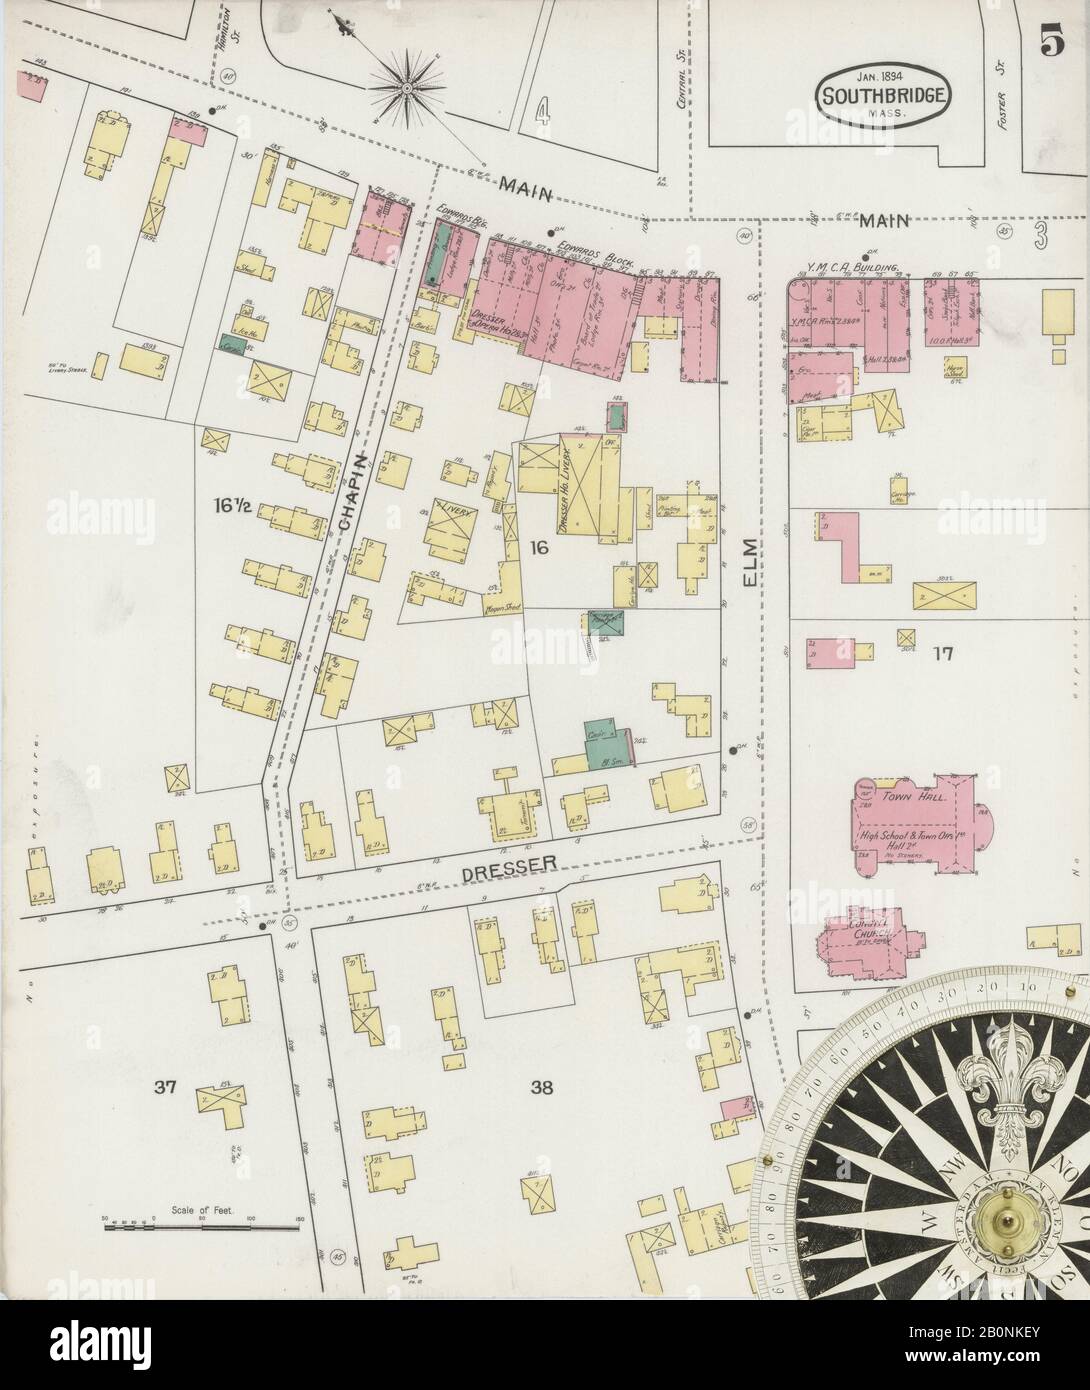 Image 5 of Sanborn Fire Insurance Map from Southbridge, Worcester County, Massachusetts. Jan 1894. 10 Sheet(s). Includes Globe Village, Sturbridge, Fiskdale, America, street map with a Nineteenth Century compass Stock Photo